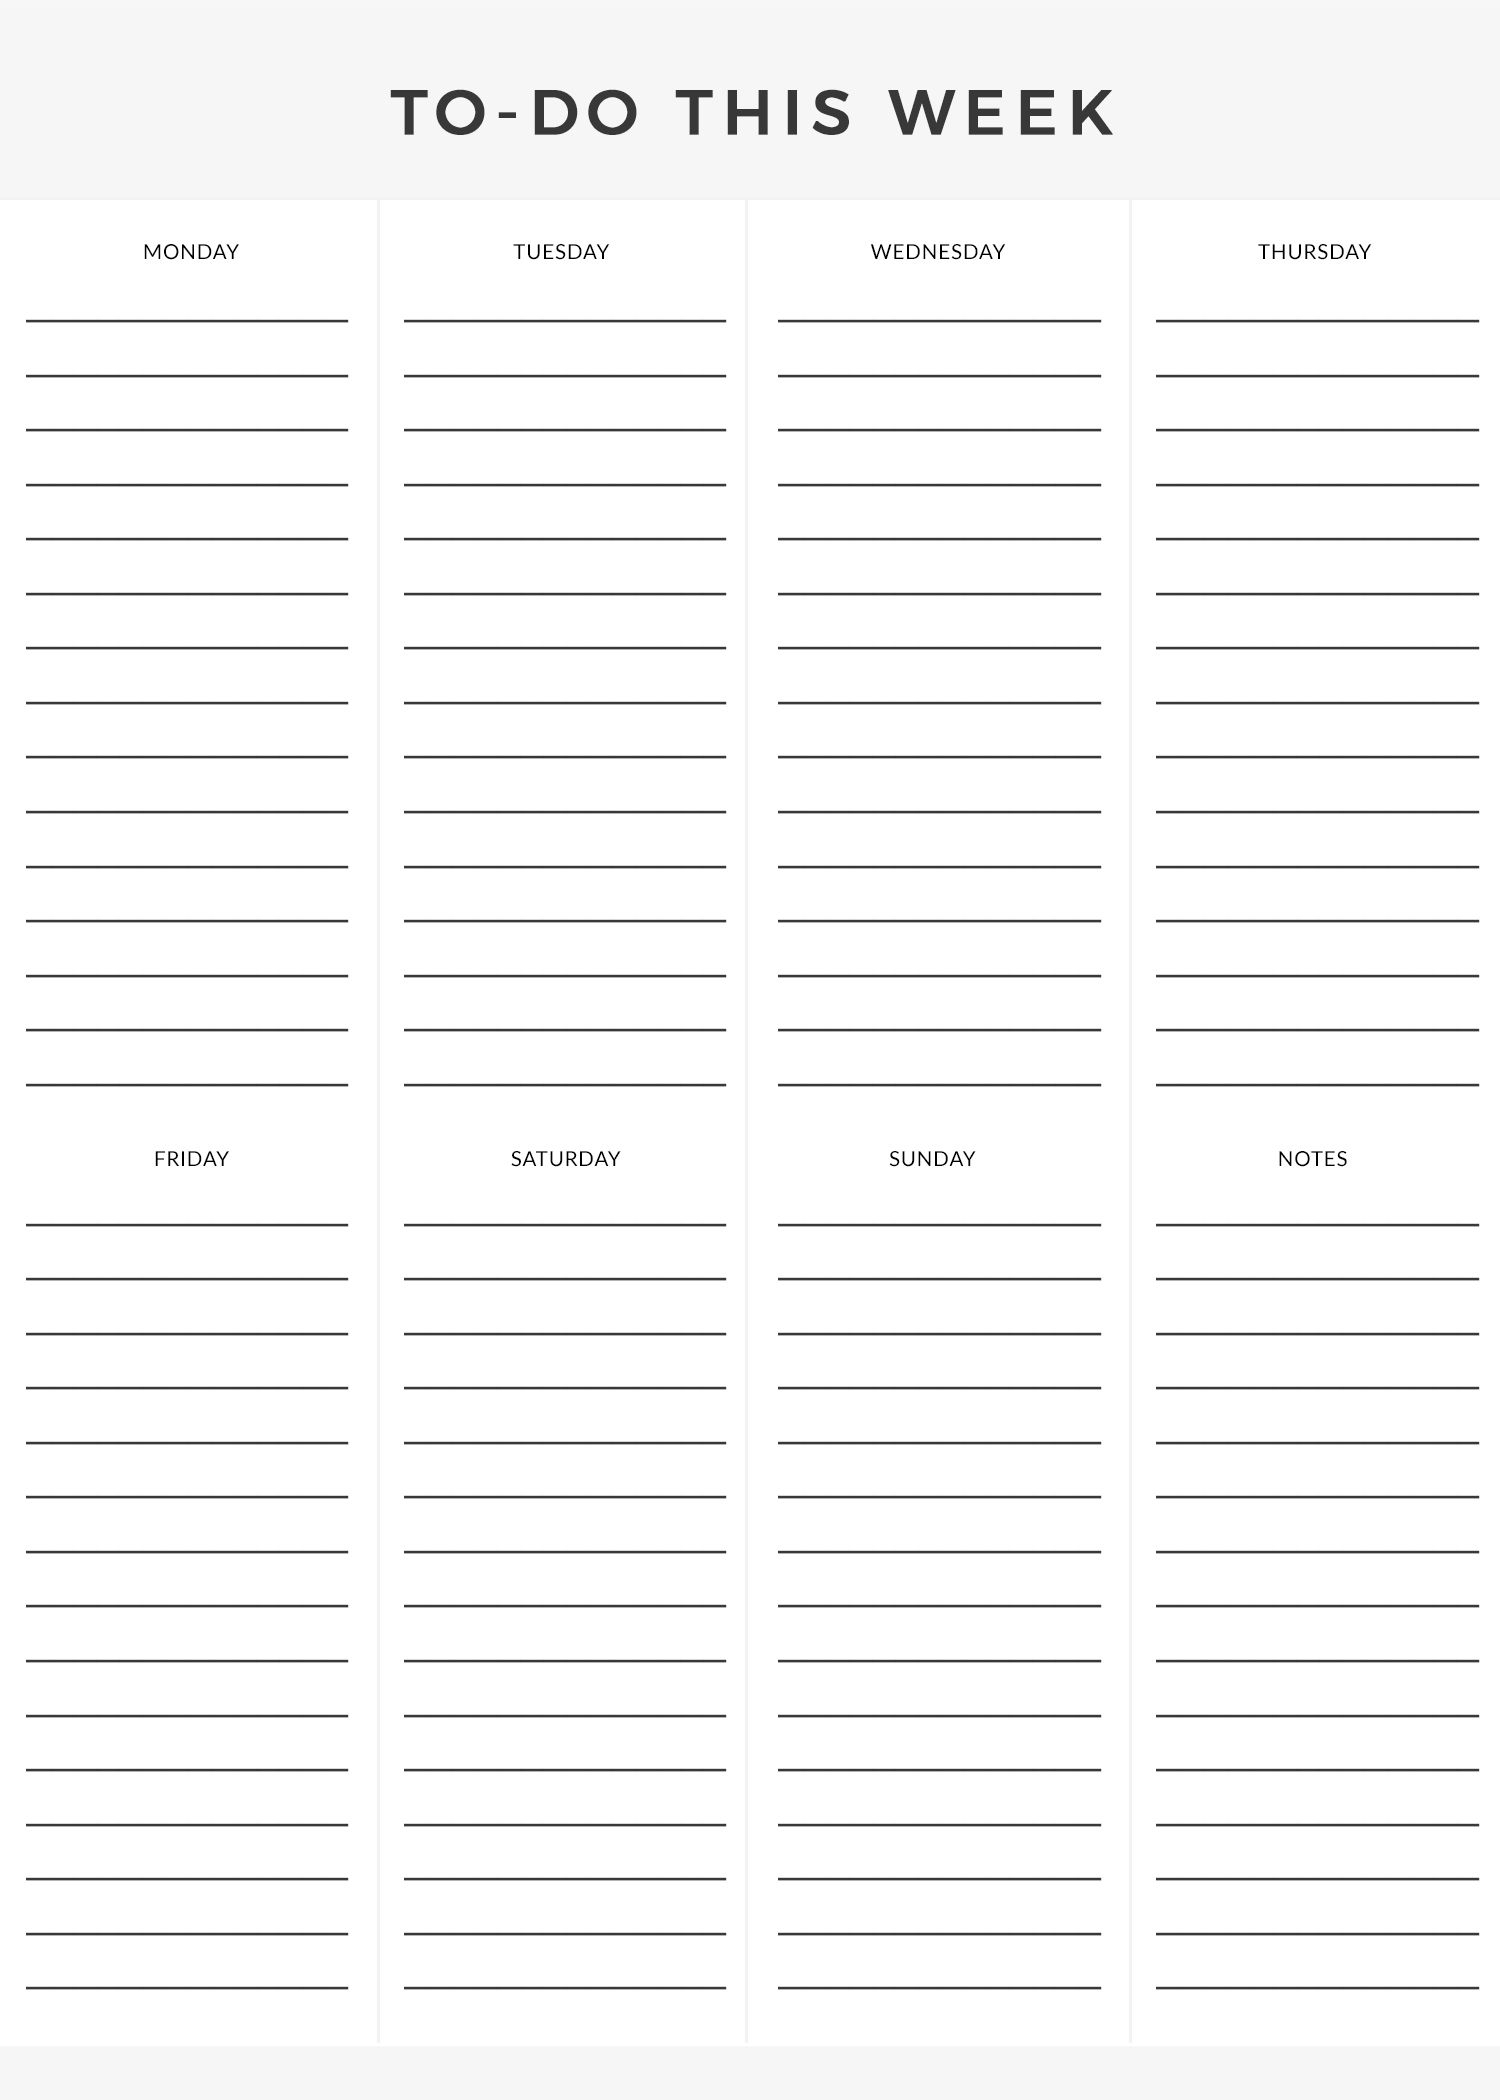 Free Printable Weekly To-Do List | Home / Workspace | Pinterest - Weekly To Do List Free Printable